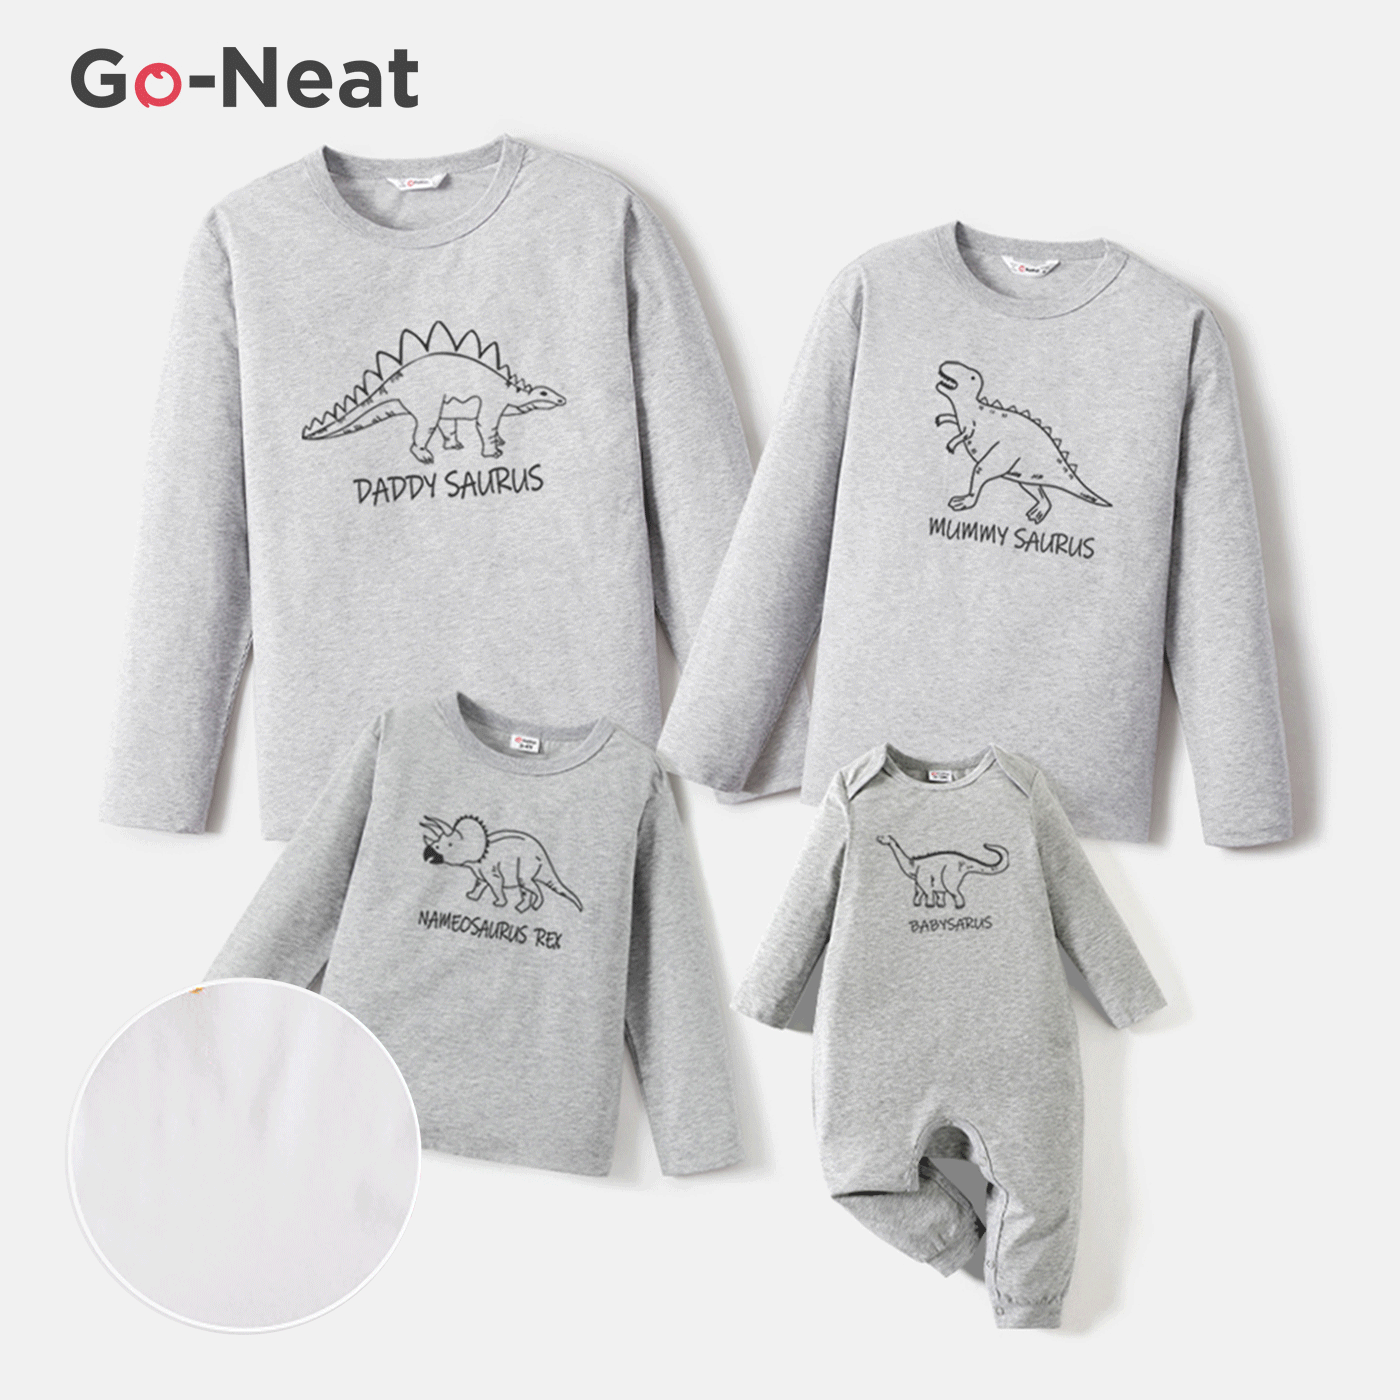 Go-Neat Water Repellent and Stain Resistant Family Matching Dinosaur & Letter Print Long-sleeve Tee